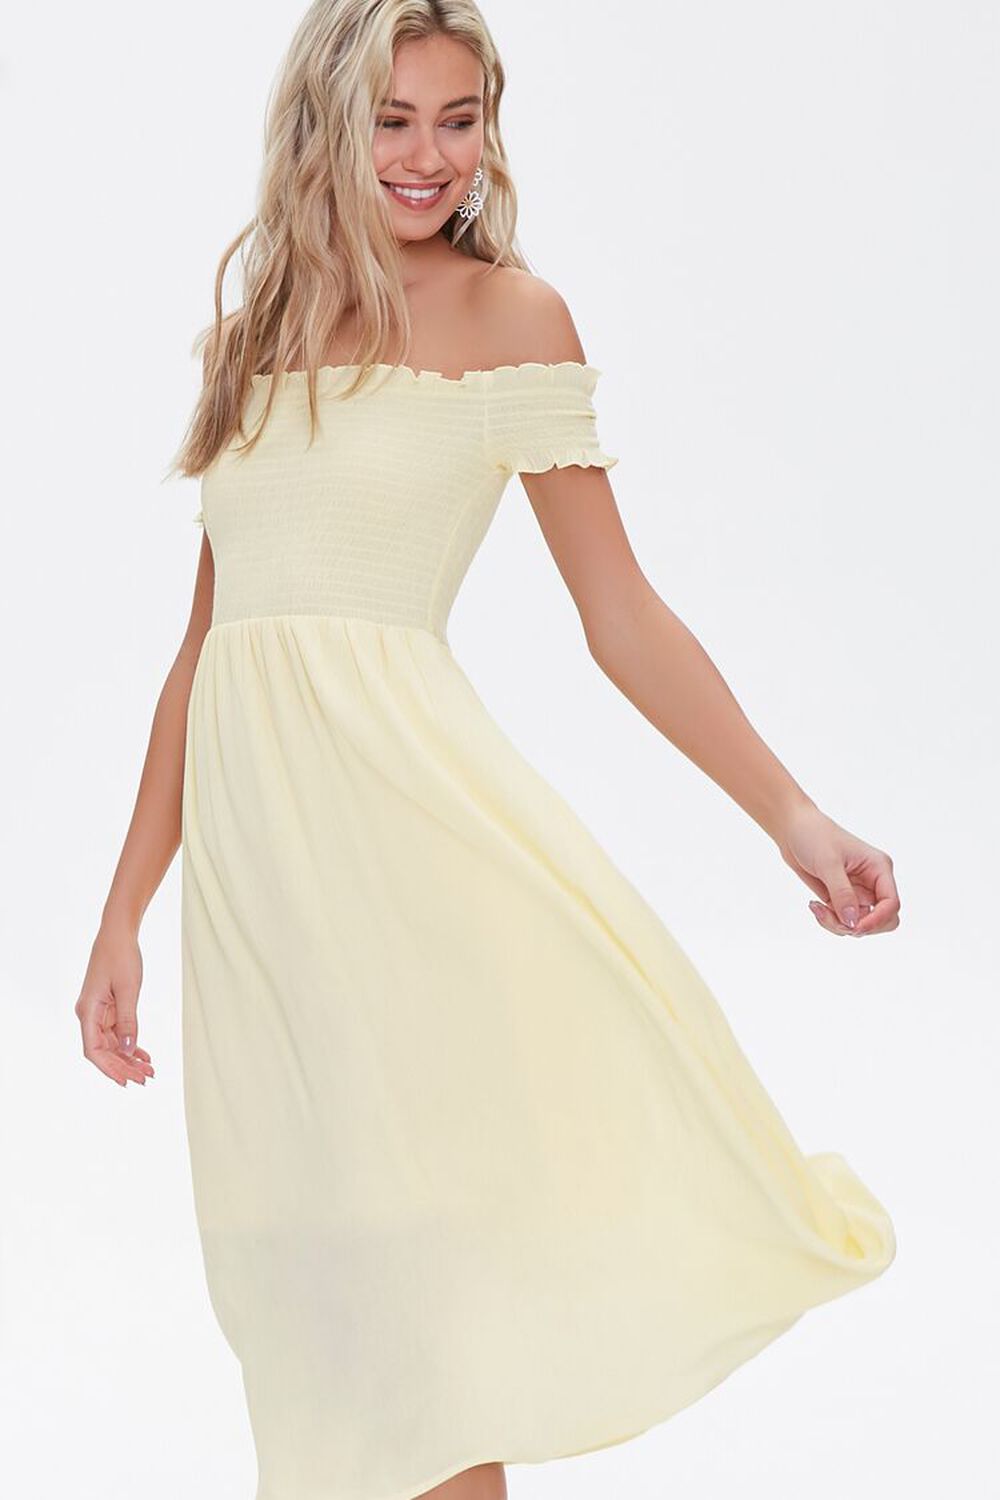 YELLOW Smocked Off-the-Shoulder Dress, image 1